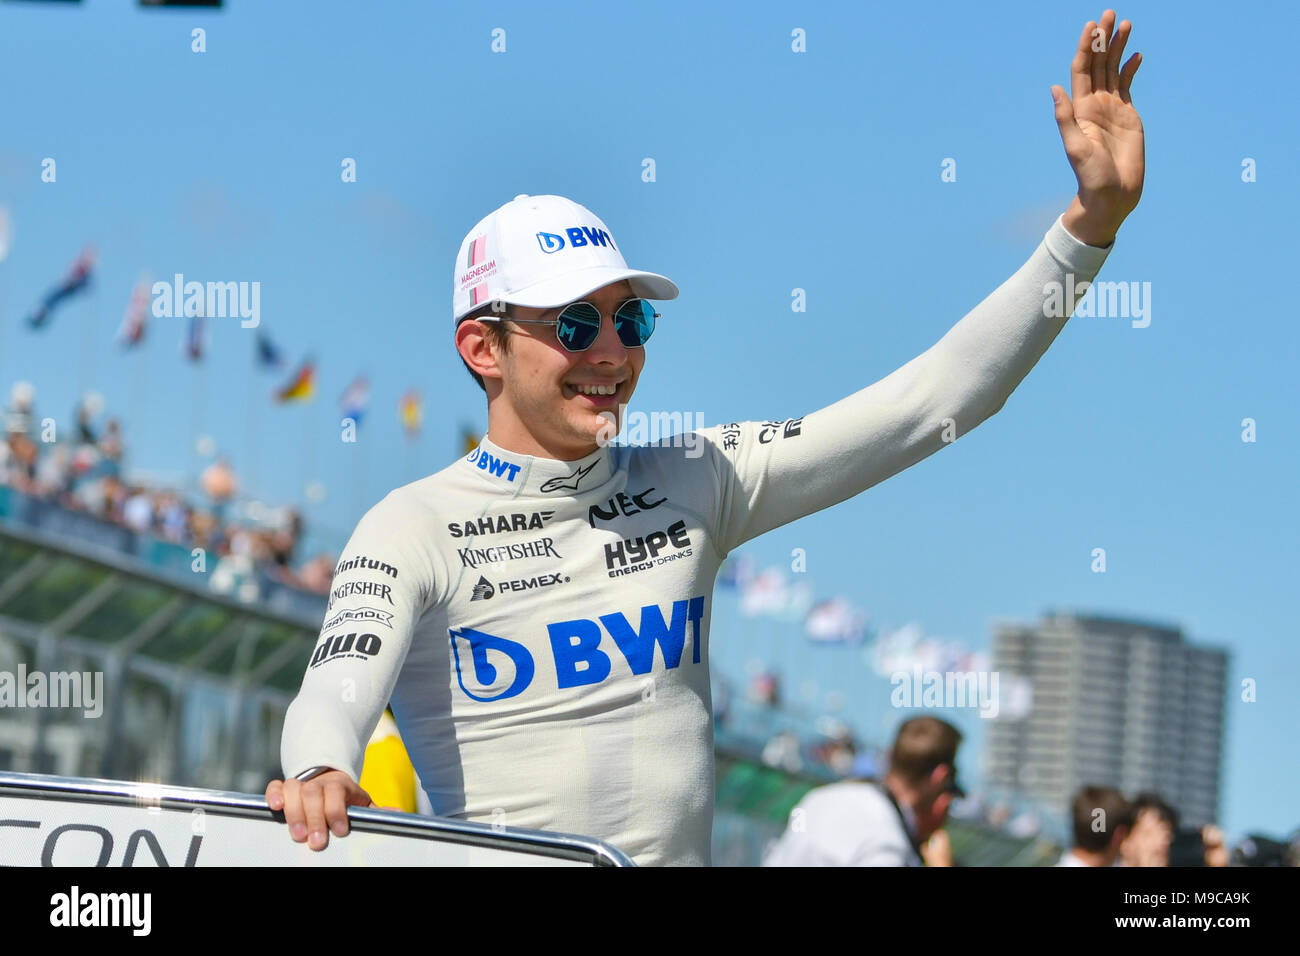 Albert Park, Melbourne, Australia. 25th Mar, 2018. Esteban Ocon (FRA) #31 from the Sahara Force India F1 team waves to the crowd during the drivers' parade at the 2018 Australian Formula One Grand Prix at Albert Park, Melbourne, Australia. Sydney Low/Cal Sport Media/Alamy Live News Stock Photo